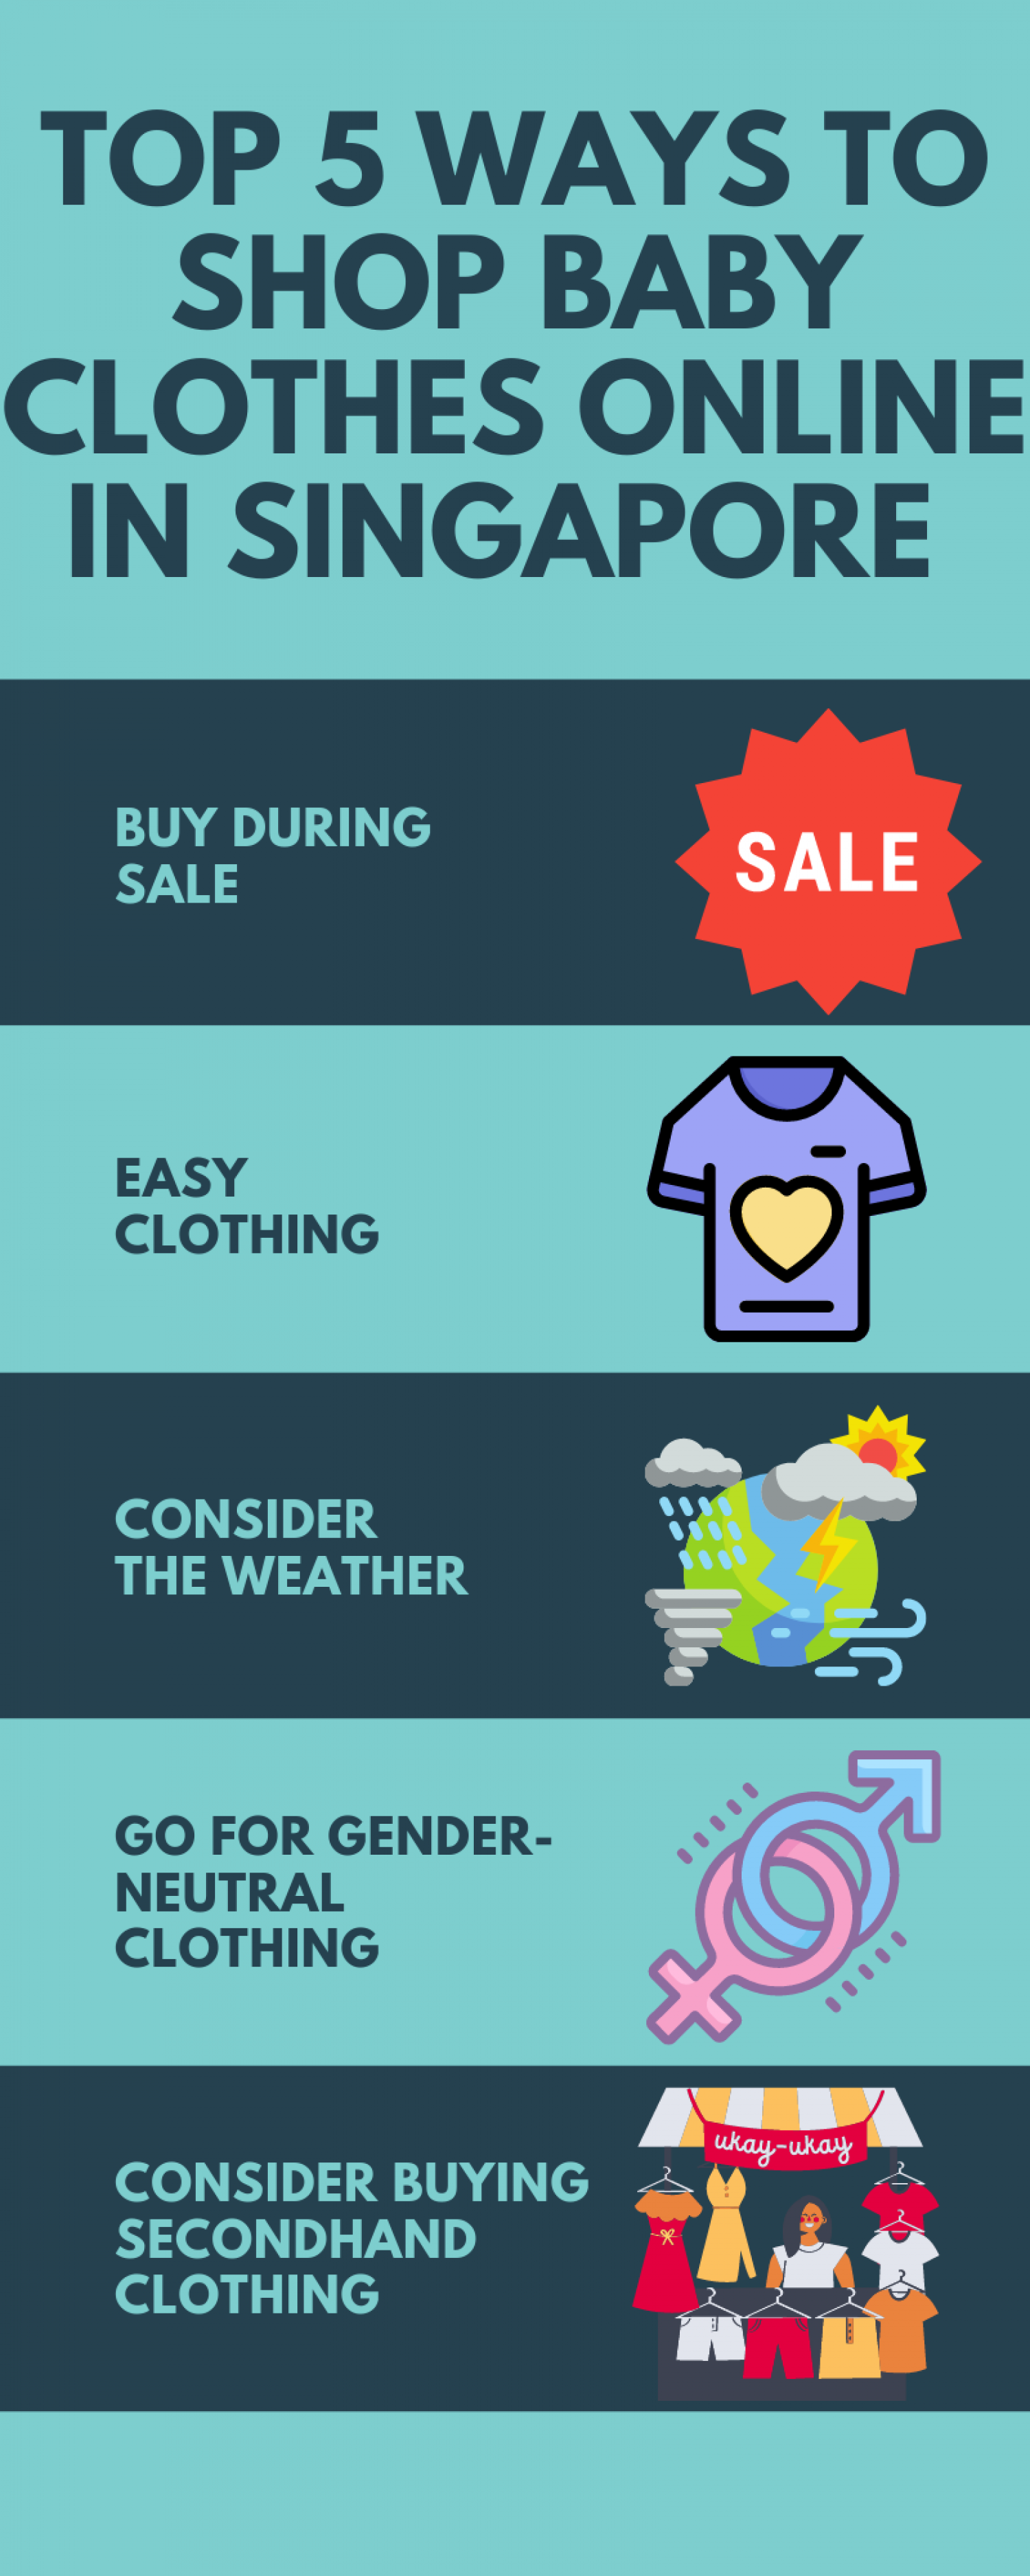 Top 5 Ways to Shop Baby Clothes Online in Singapore  Infographic